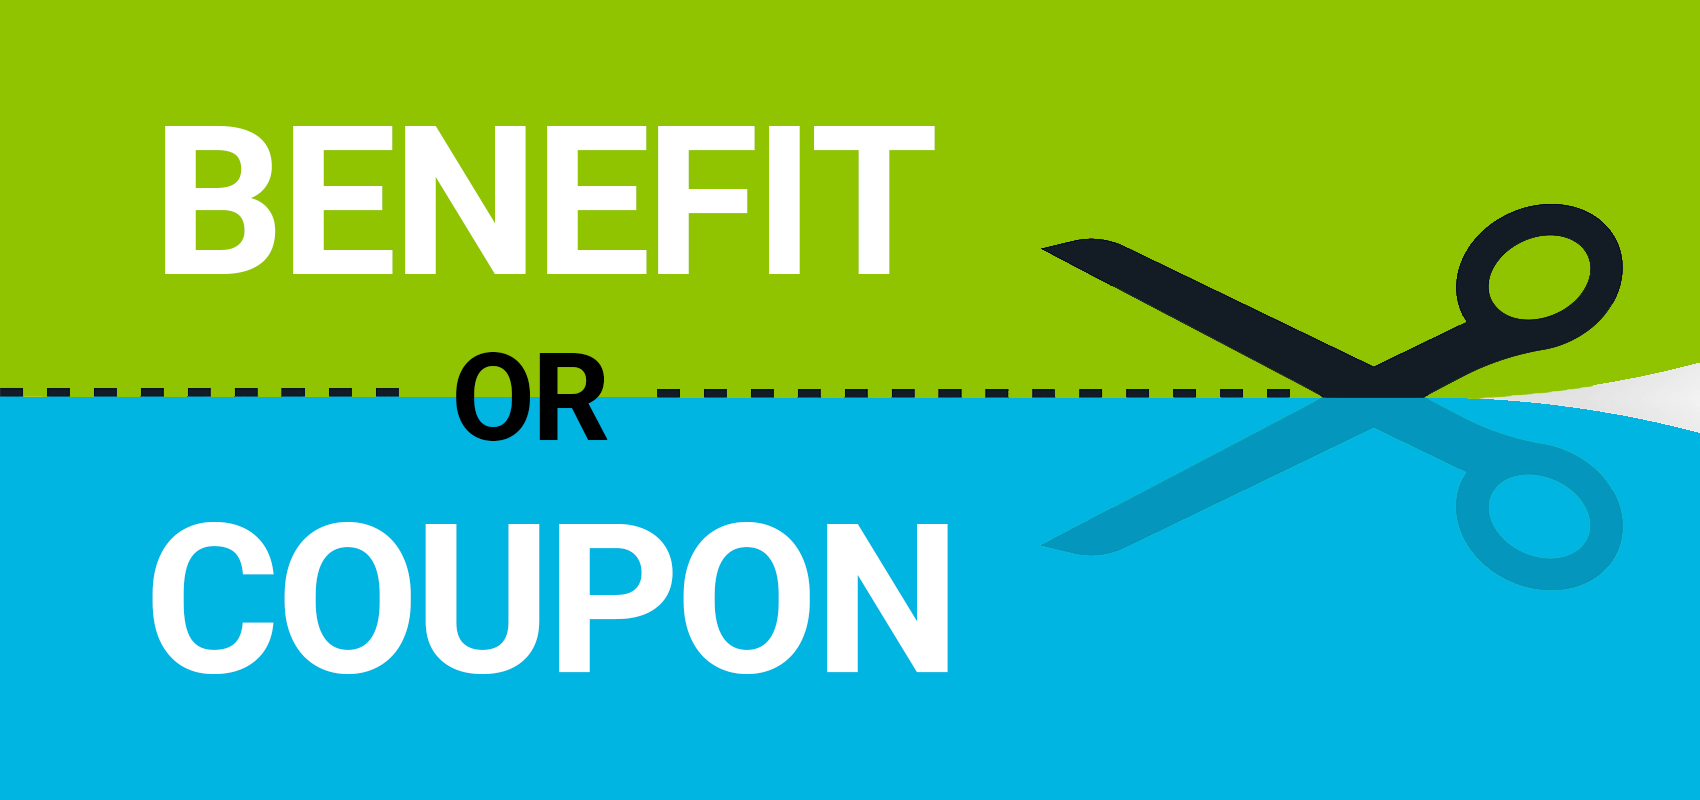 Should I Use My Pharmacy Benefit or Coupons? | RxBenefits